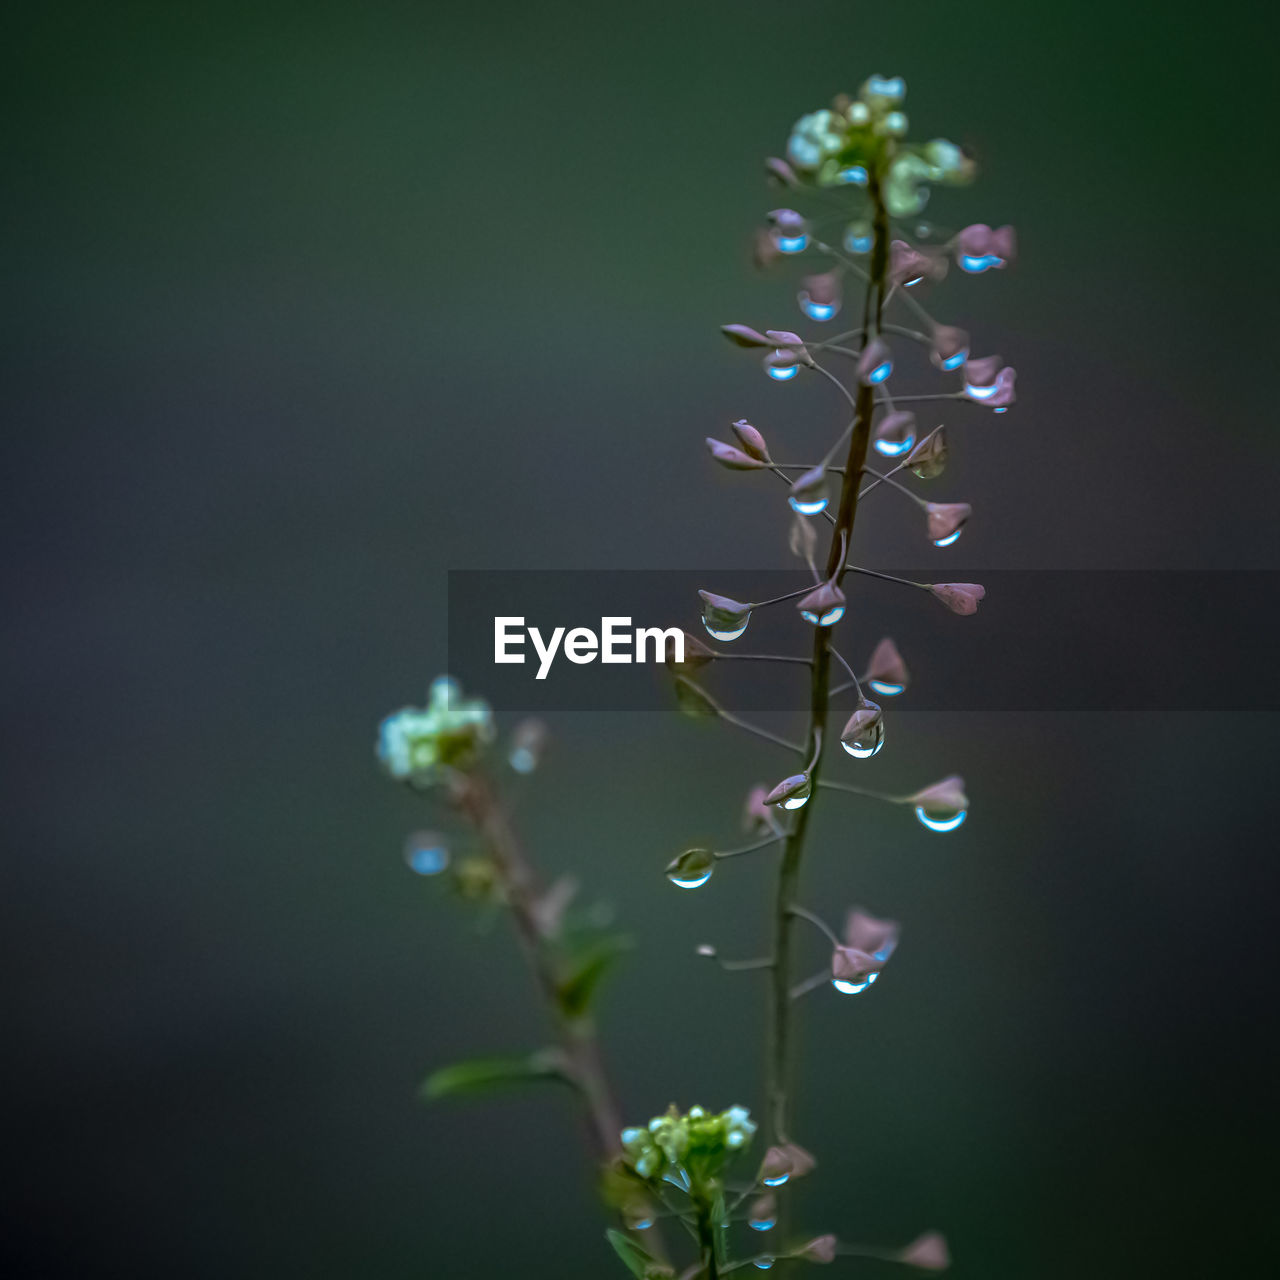 plant, flower, beauty in nature, nature, freshness, flowering plant, fragility, macro photography, close-up, growth, green, no people, plant stem, moisture, leaf, focus on foreground, dew, drop, outdoors, selective focus, branch, purple, plant part, wet, water, springtime, tranquility, day, petal, grass